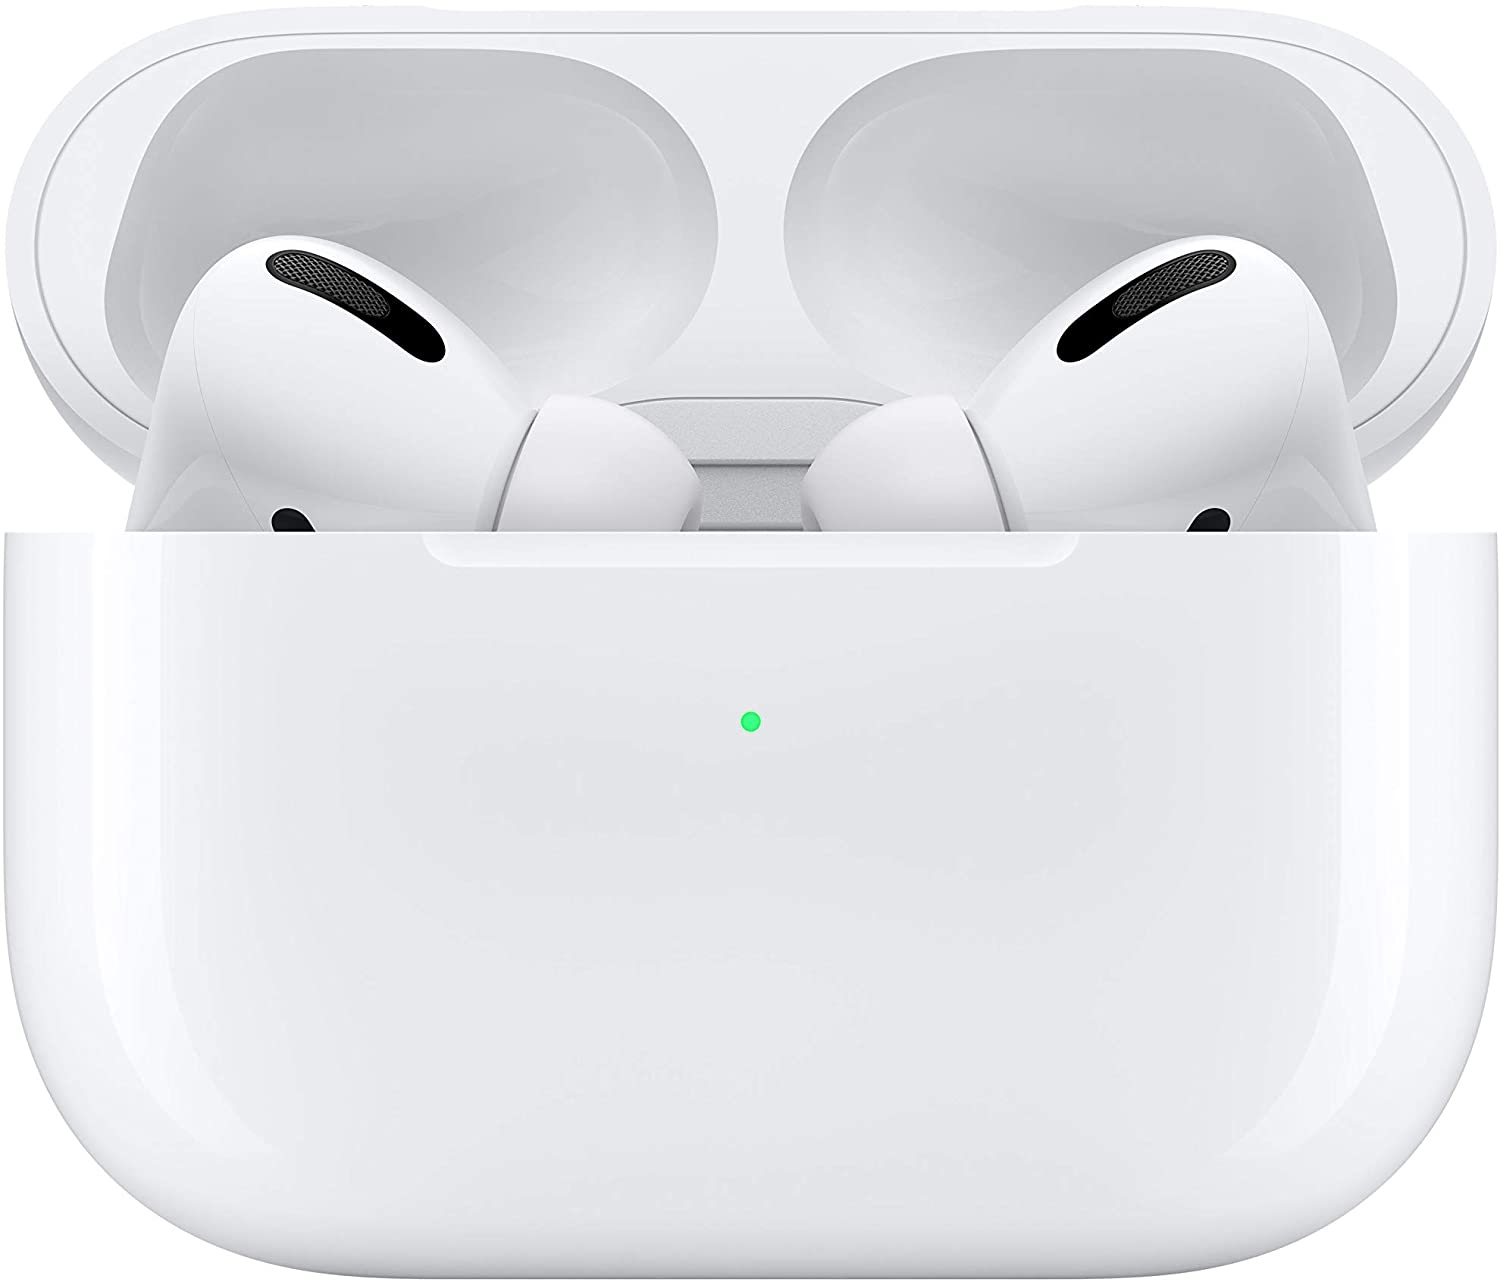 AirPods Pro 左耳のみ エアーポッズ プロ 新品 国内正規品